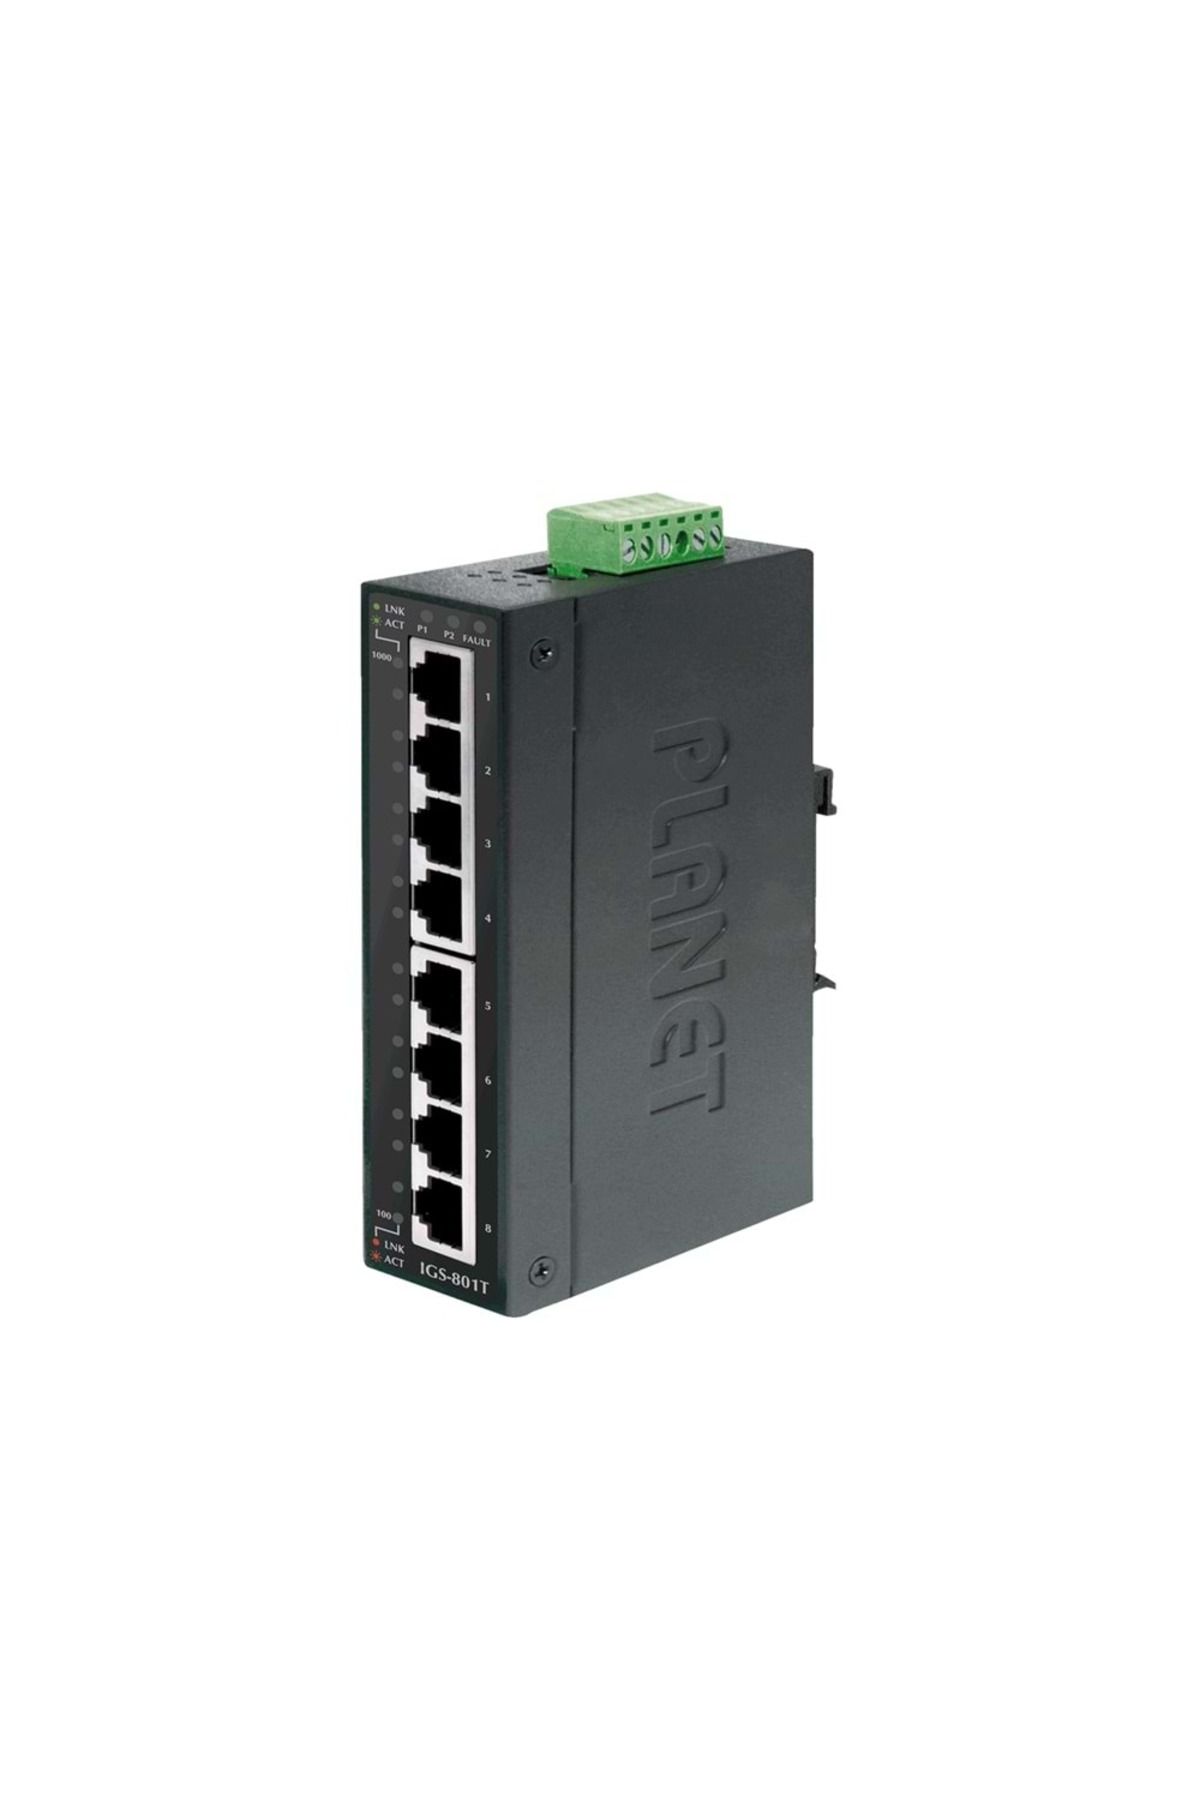 Planet 8-Port 10/100/1000Mbps Industrial Ethernet Switch (-40~75 Degree C)